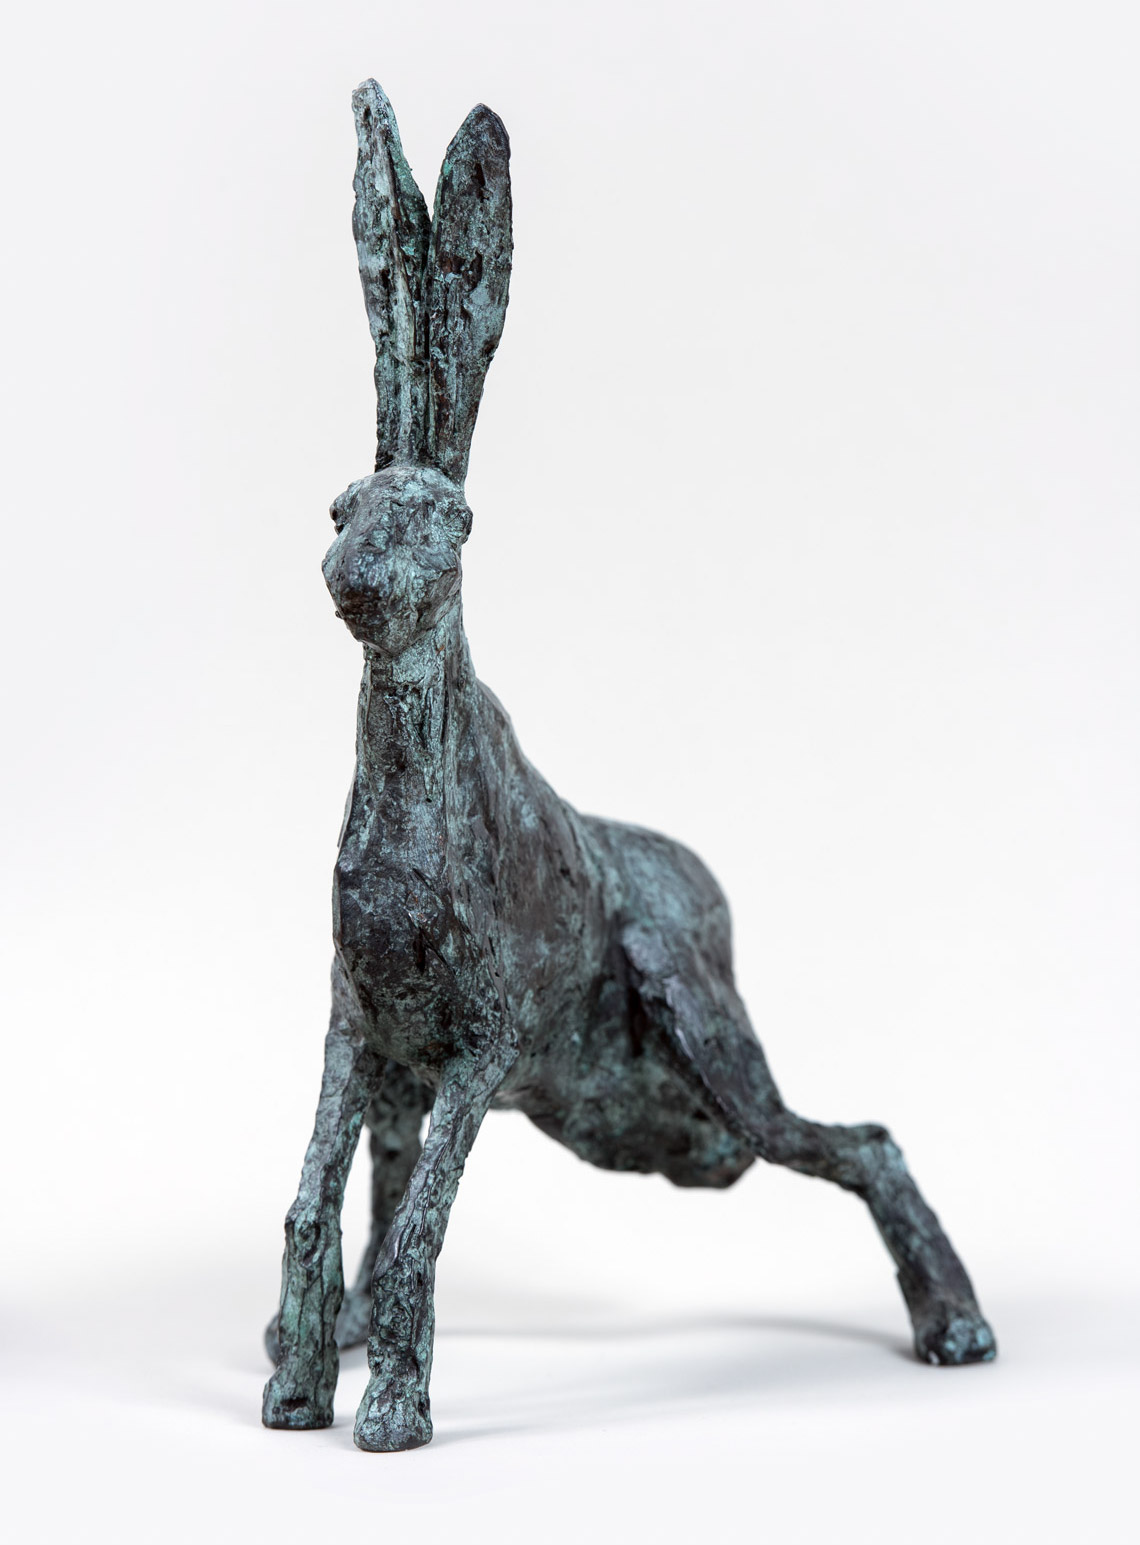 Michael Mohns, Hase, stehend, 2014